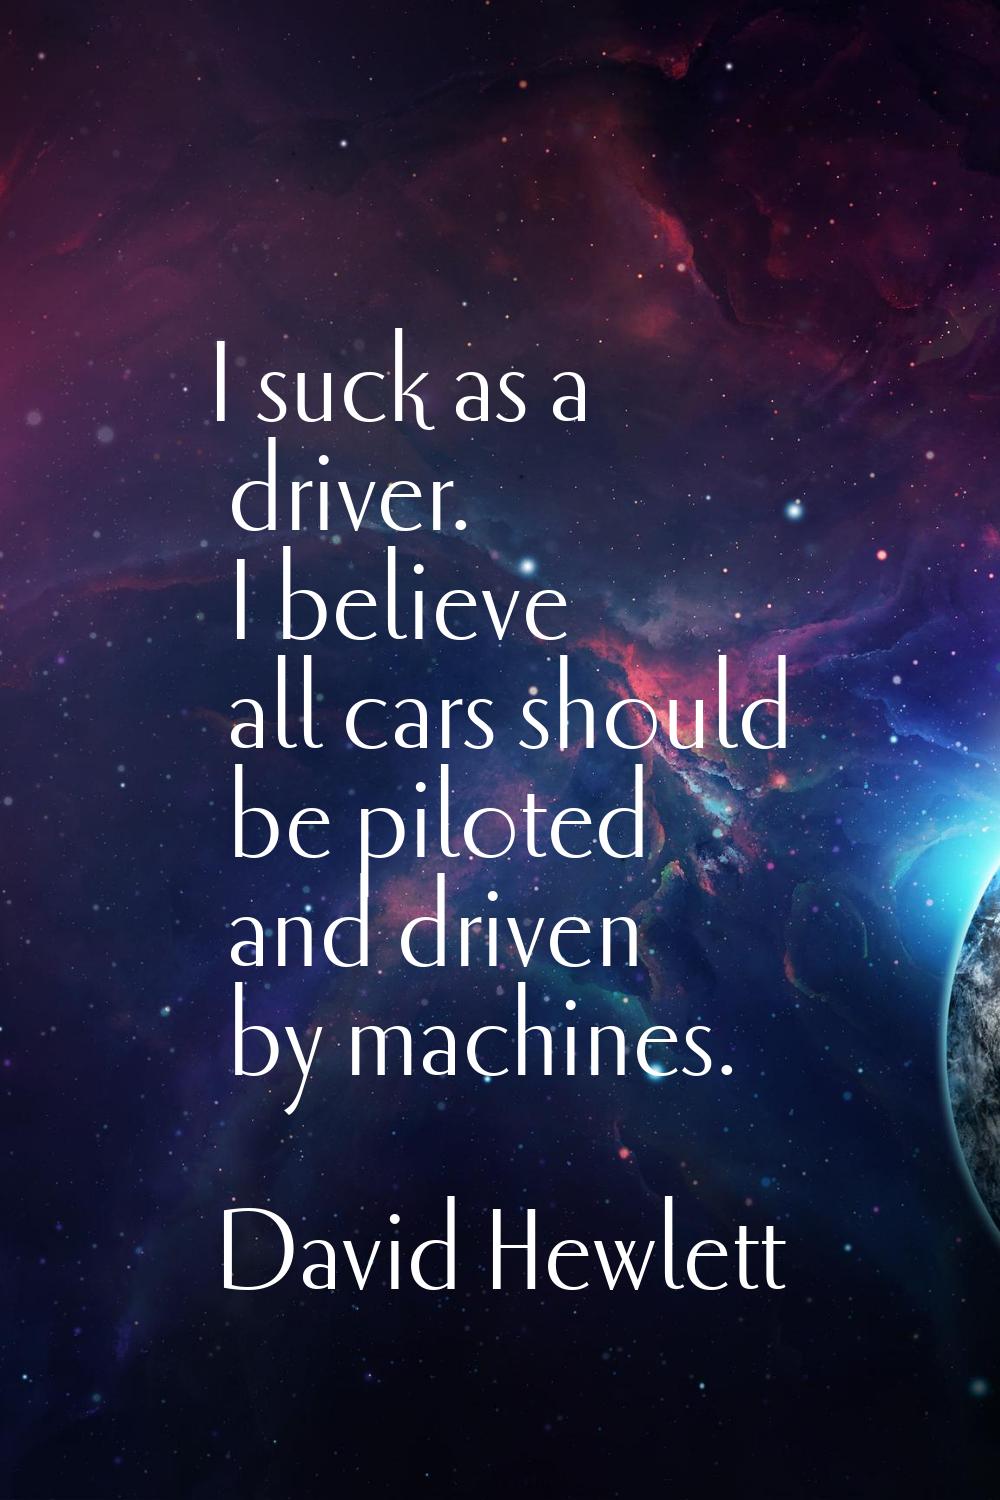 I suck as a driver. I believe all cars should be piloted and driven by machines.